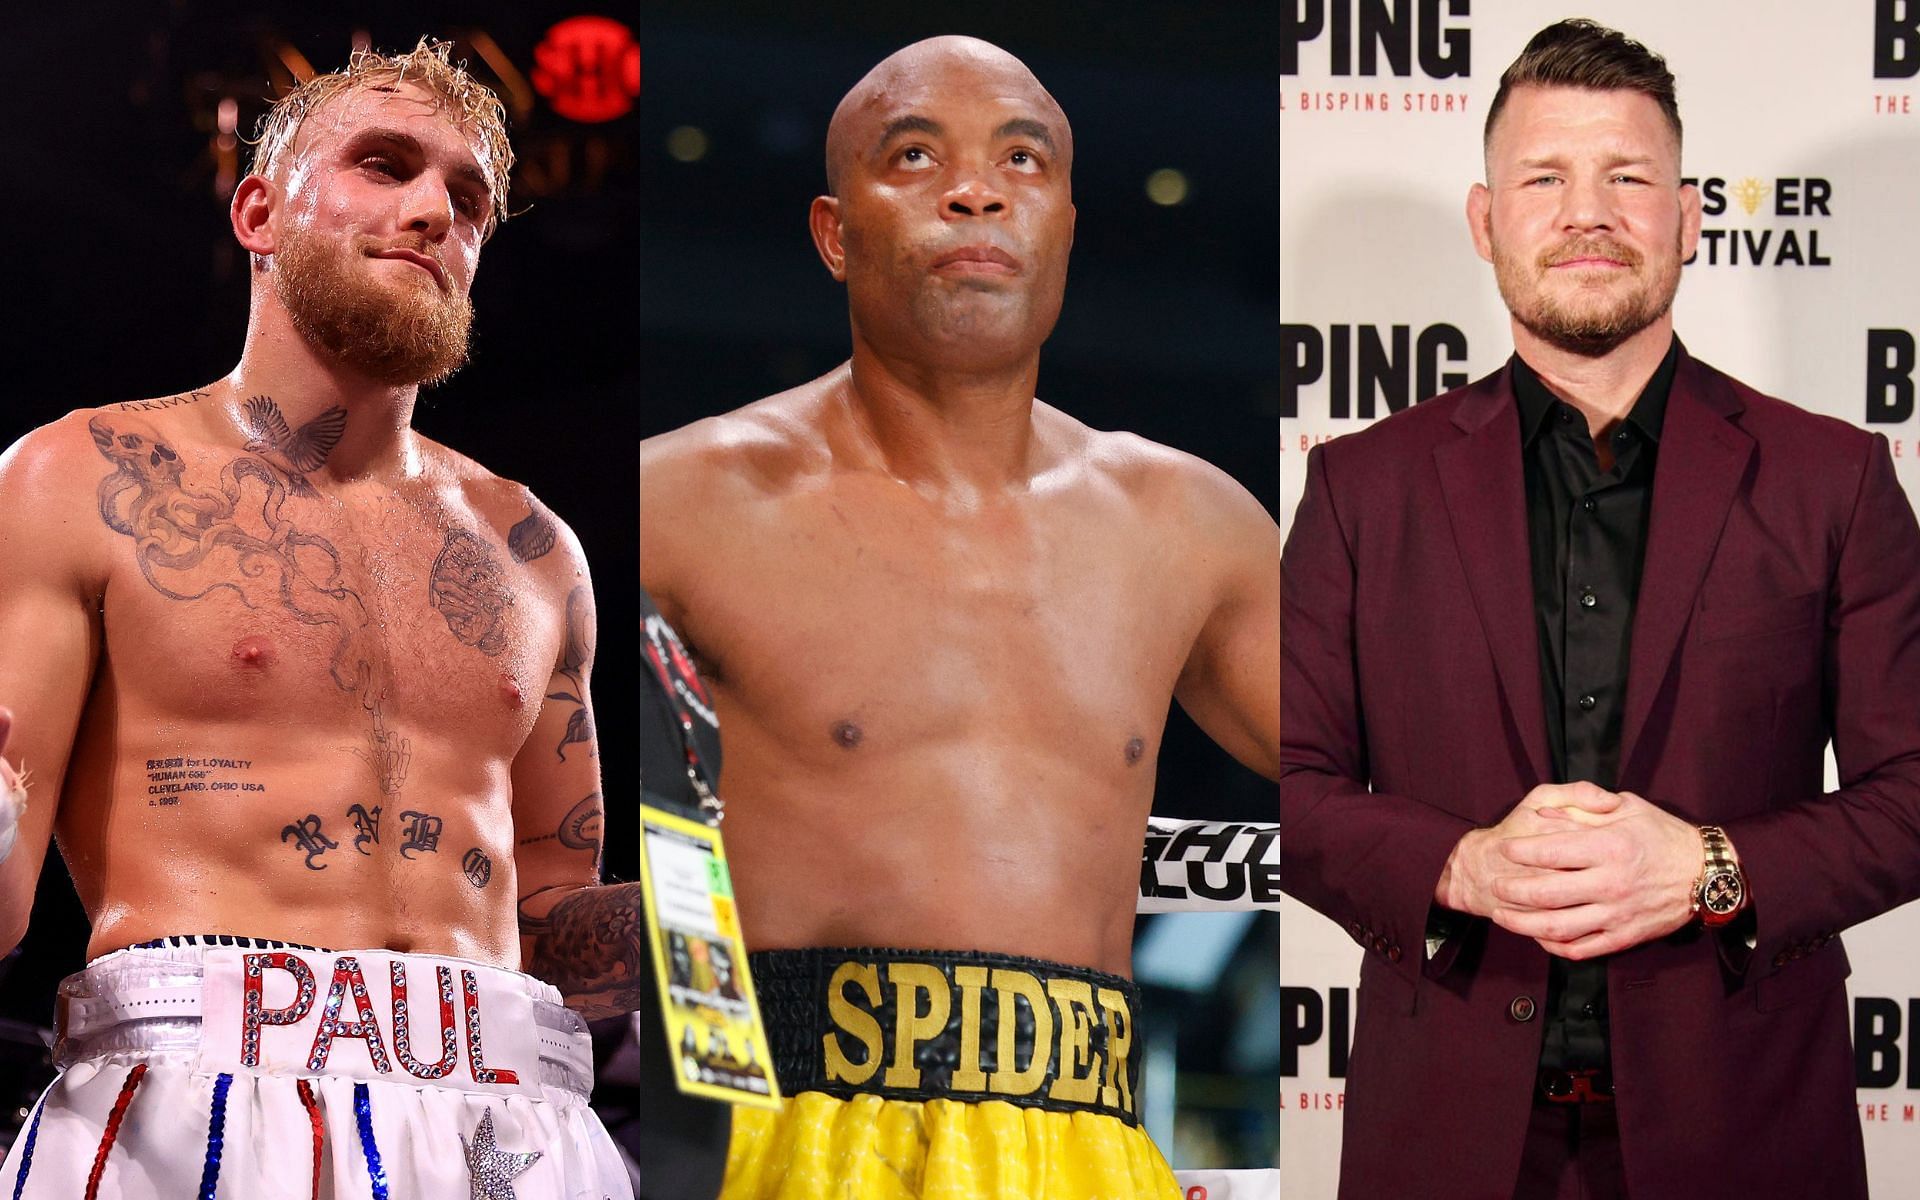 Jake Paul (Left), Anderson Silva (Middle), and Michael Bisping (Right) [Image courtesy: Getty Images and @mikebisping Instagram]